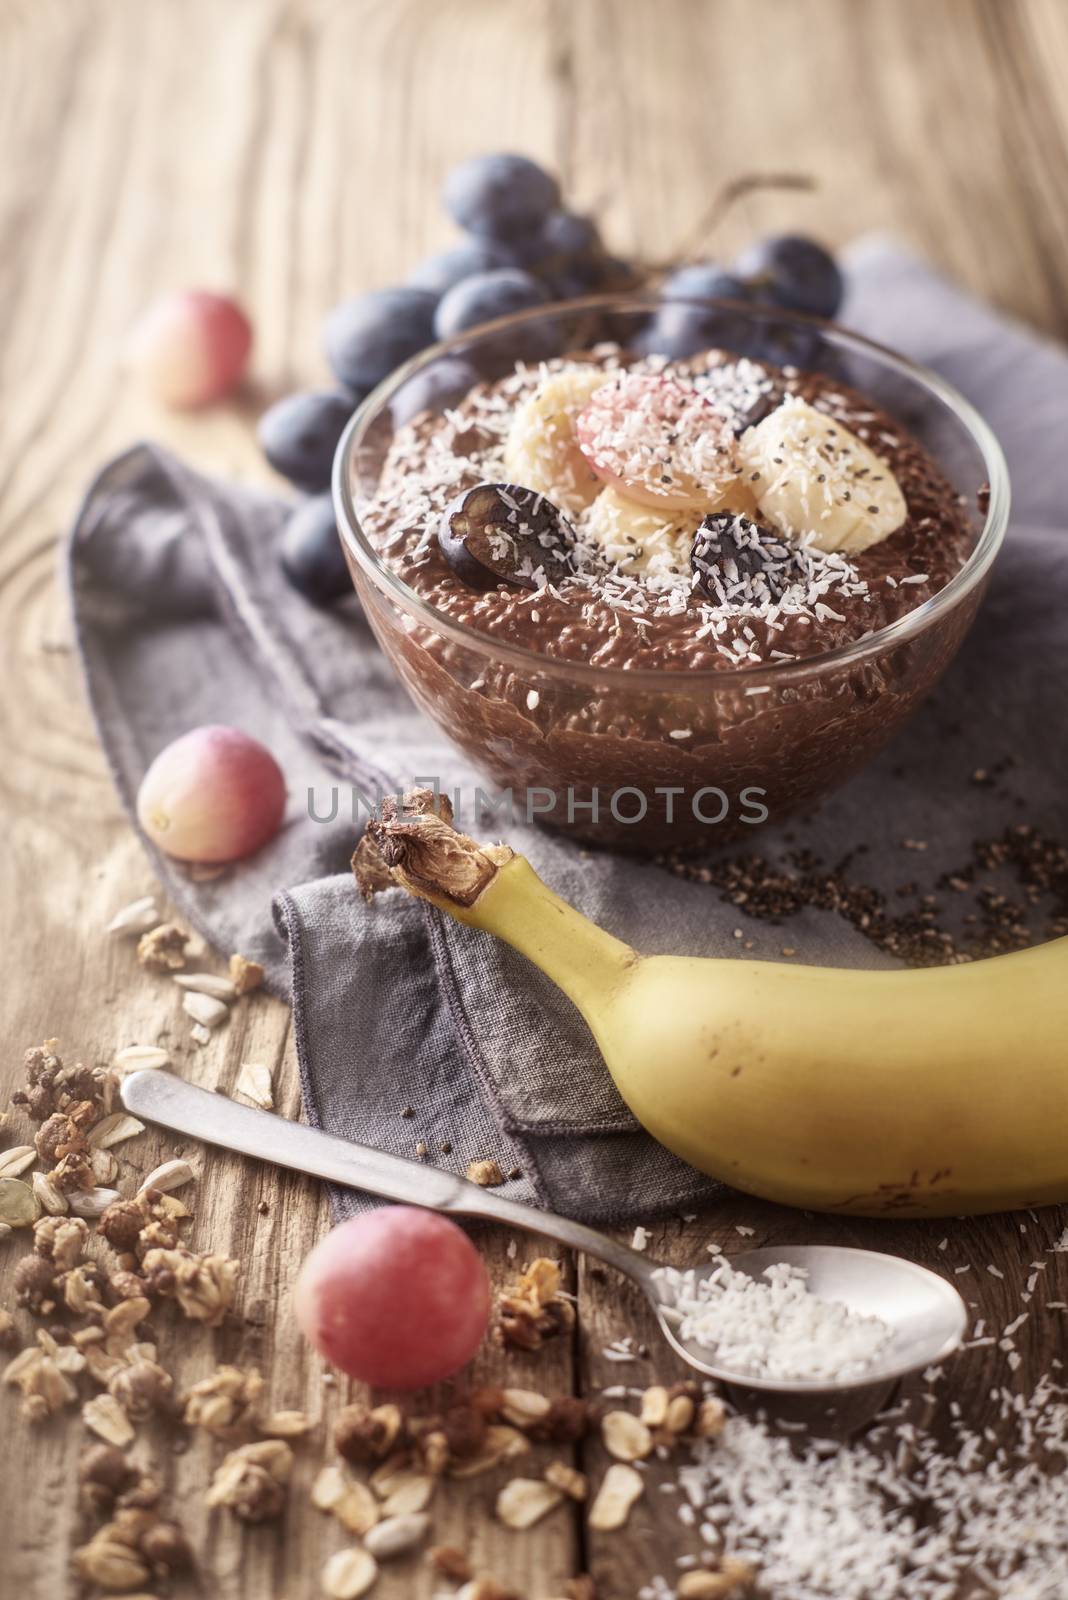 Chocolate chia pudding with fruit in the glass bowl on the wooden table by Deniskarpenkov